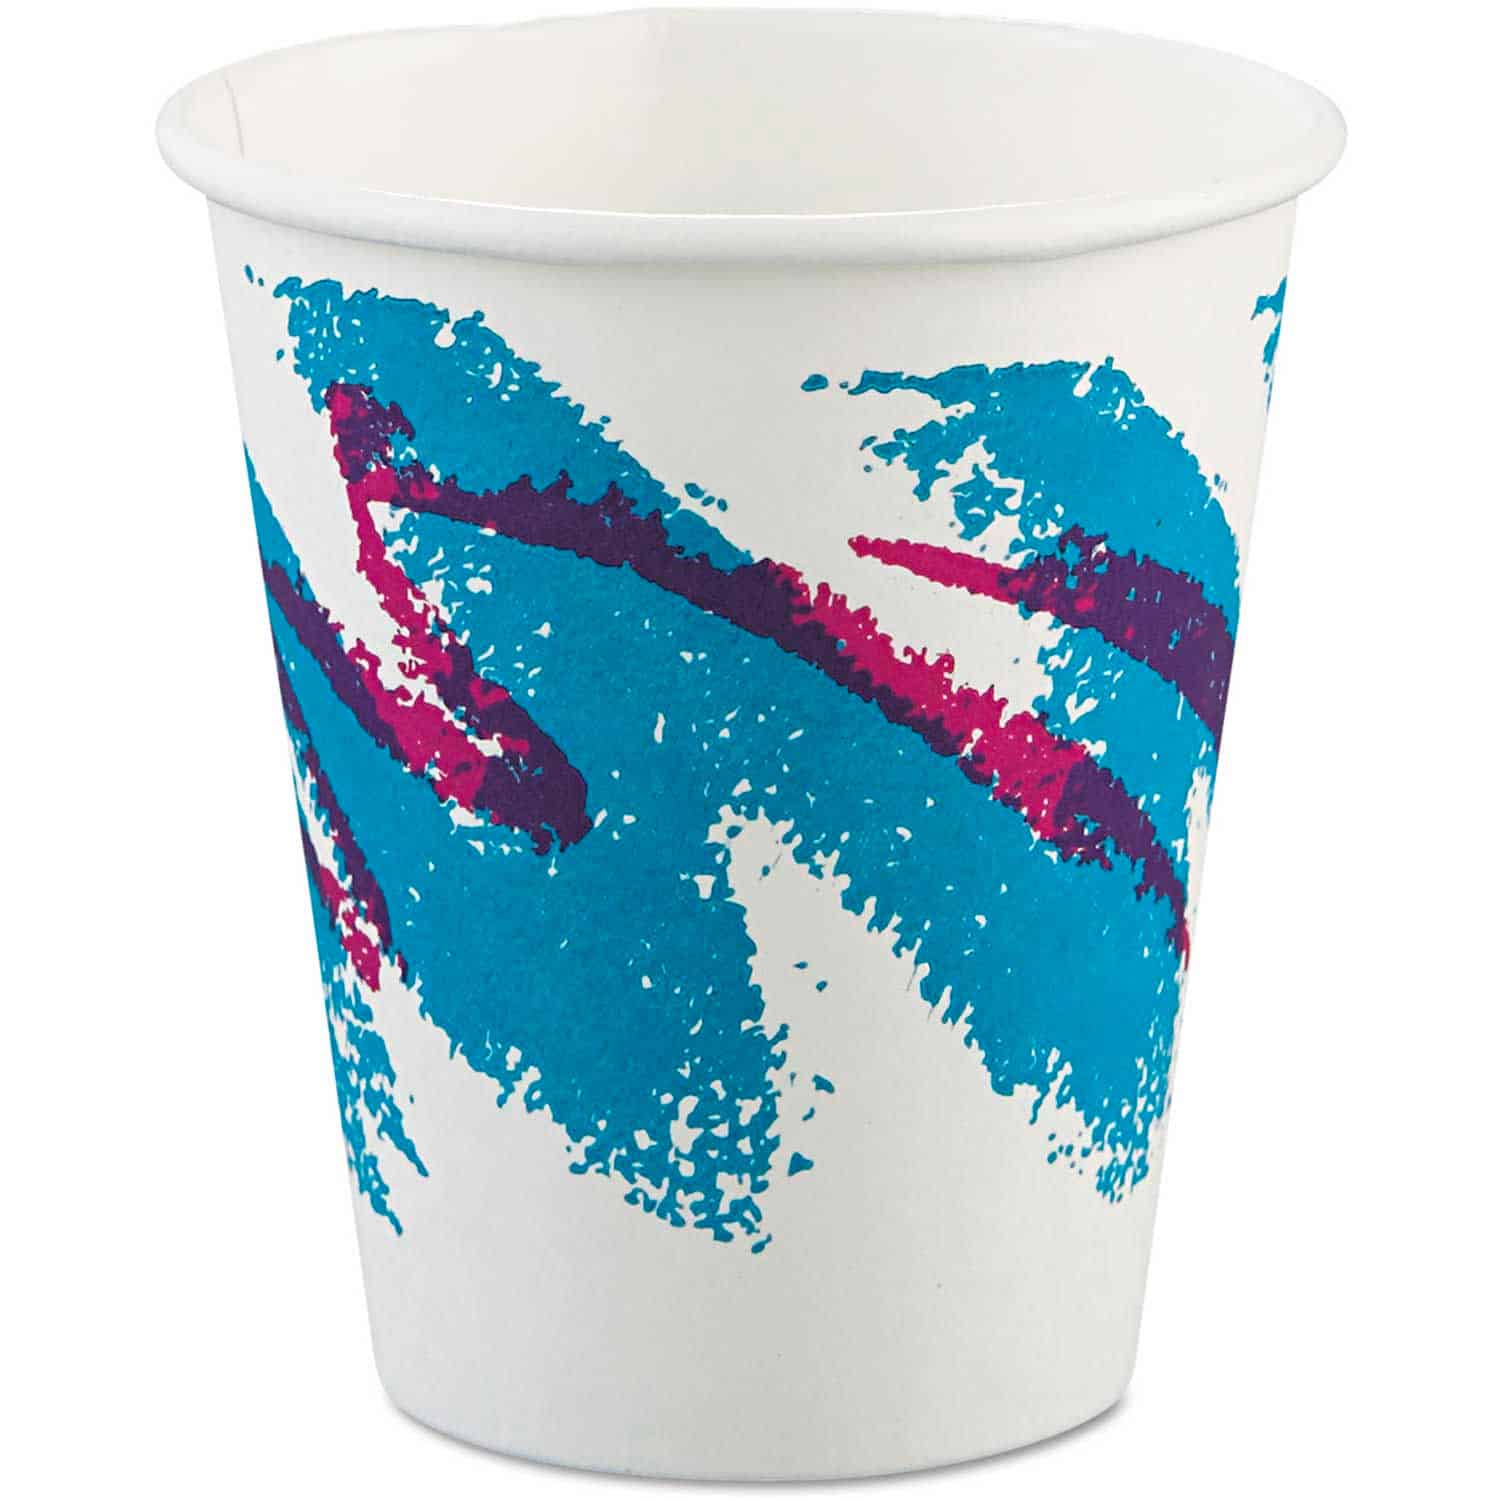 Three Keys to Marketing Sustainable Brands - A (virgin) paper cup